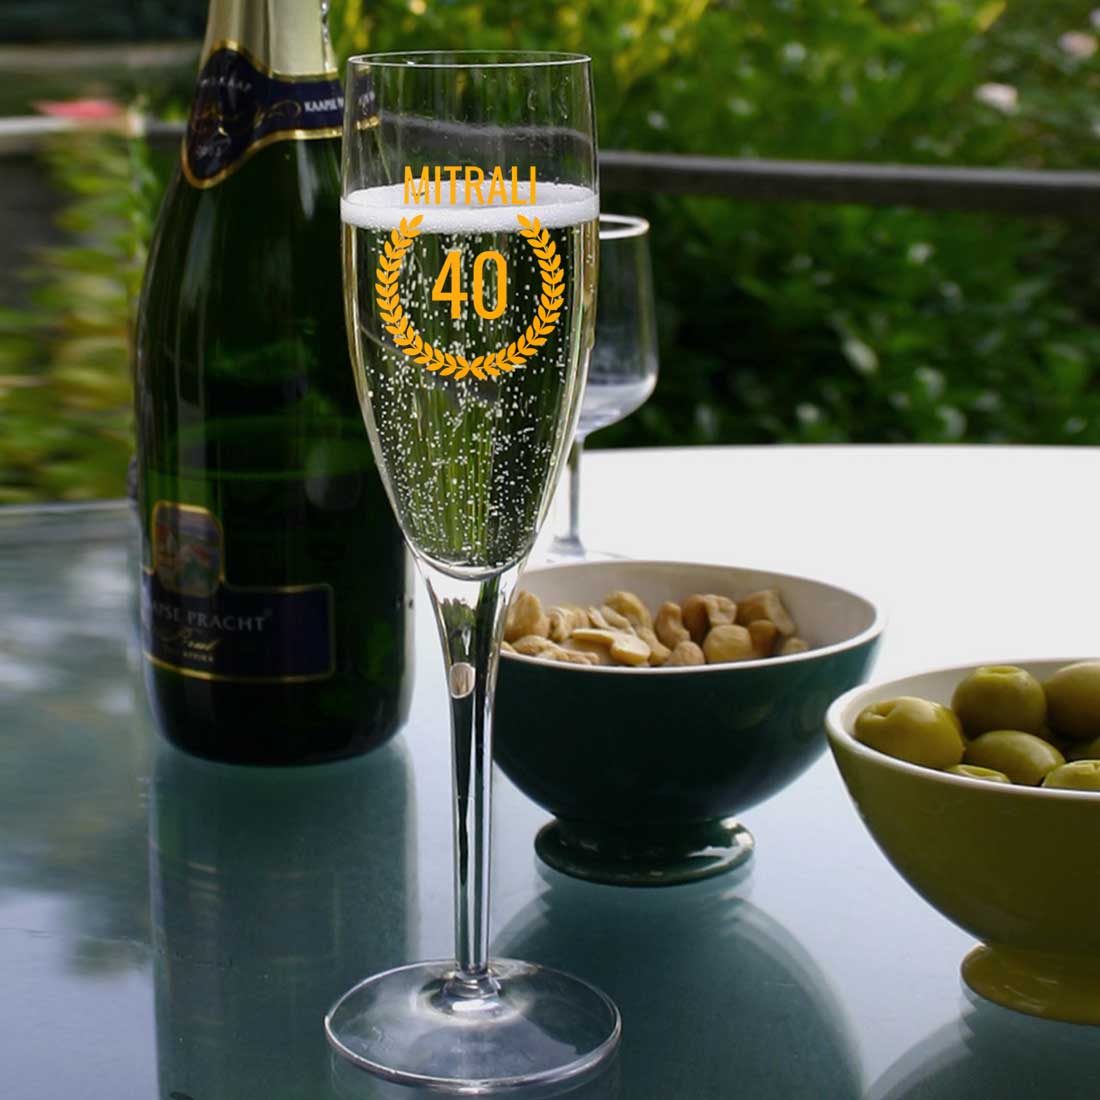 Custom Champagne Glass 40th Birthday Ideas For Women- Add Any Number